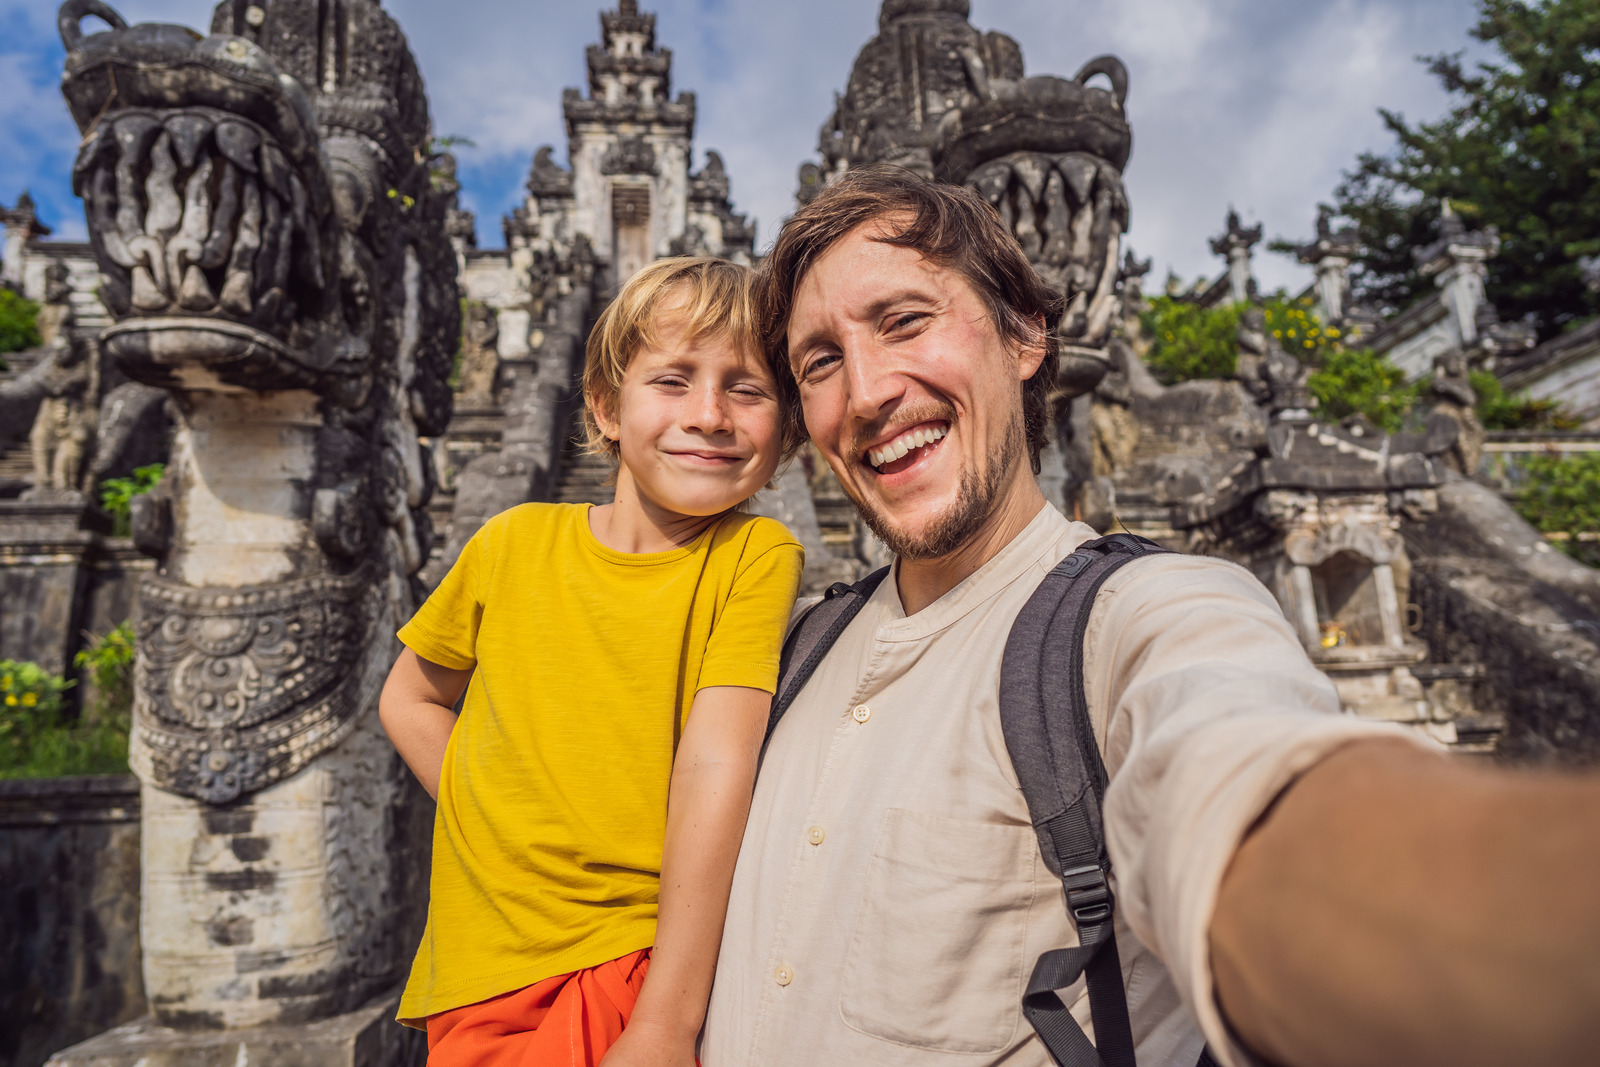 Bali Holidays: The Ultimate Bali Travel Guide I Stay at Home Mum